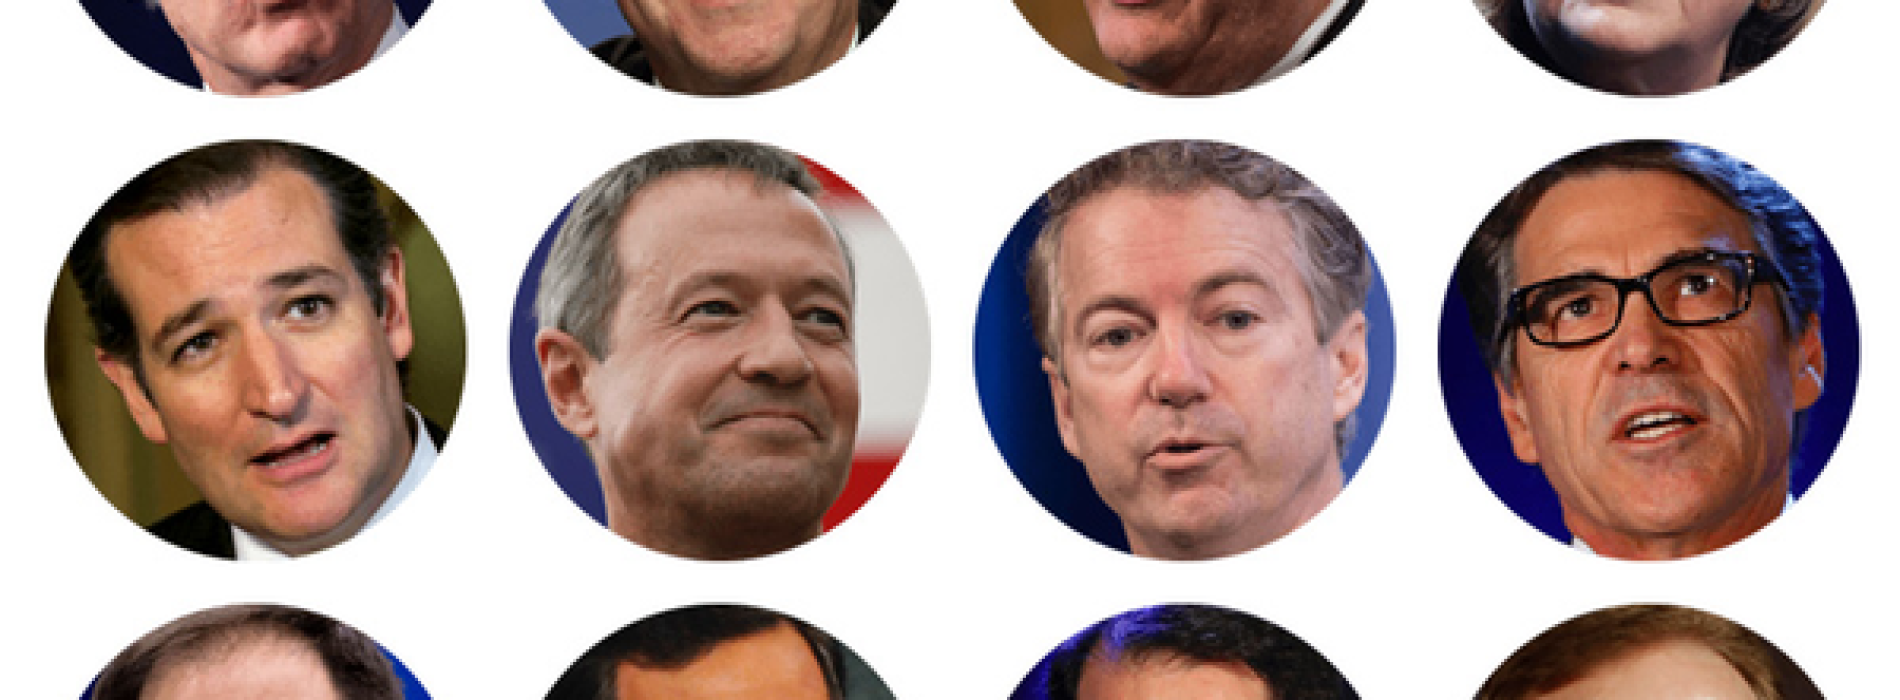 The winner of today’s GOP presidential straw poll will shock you